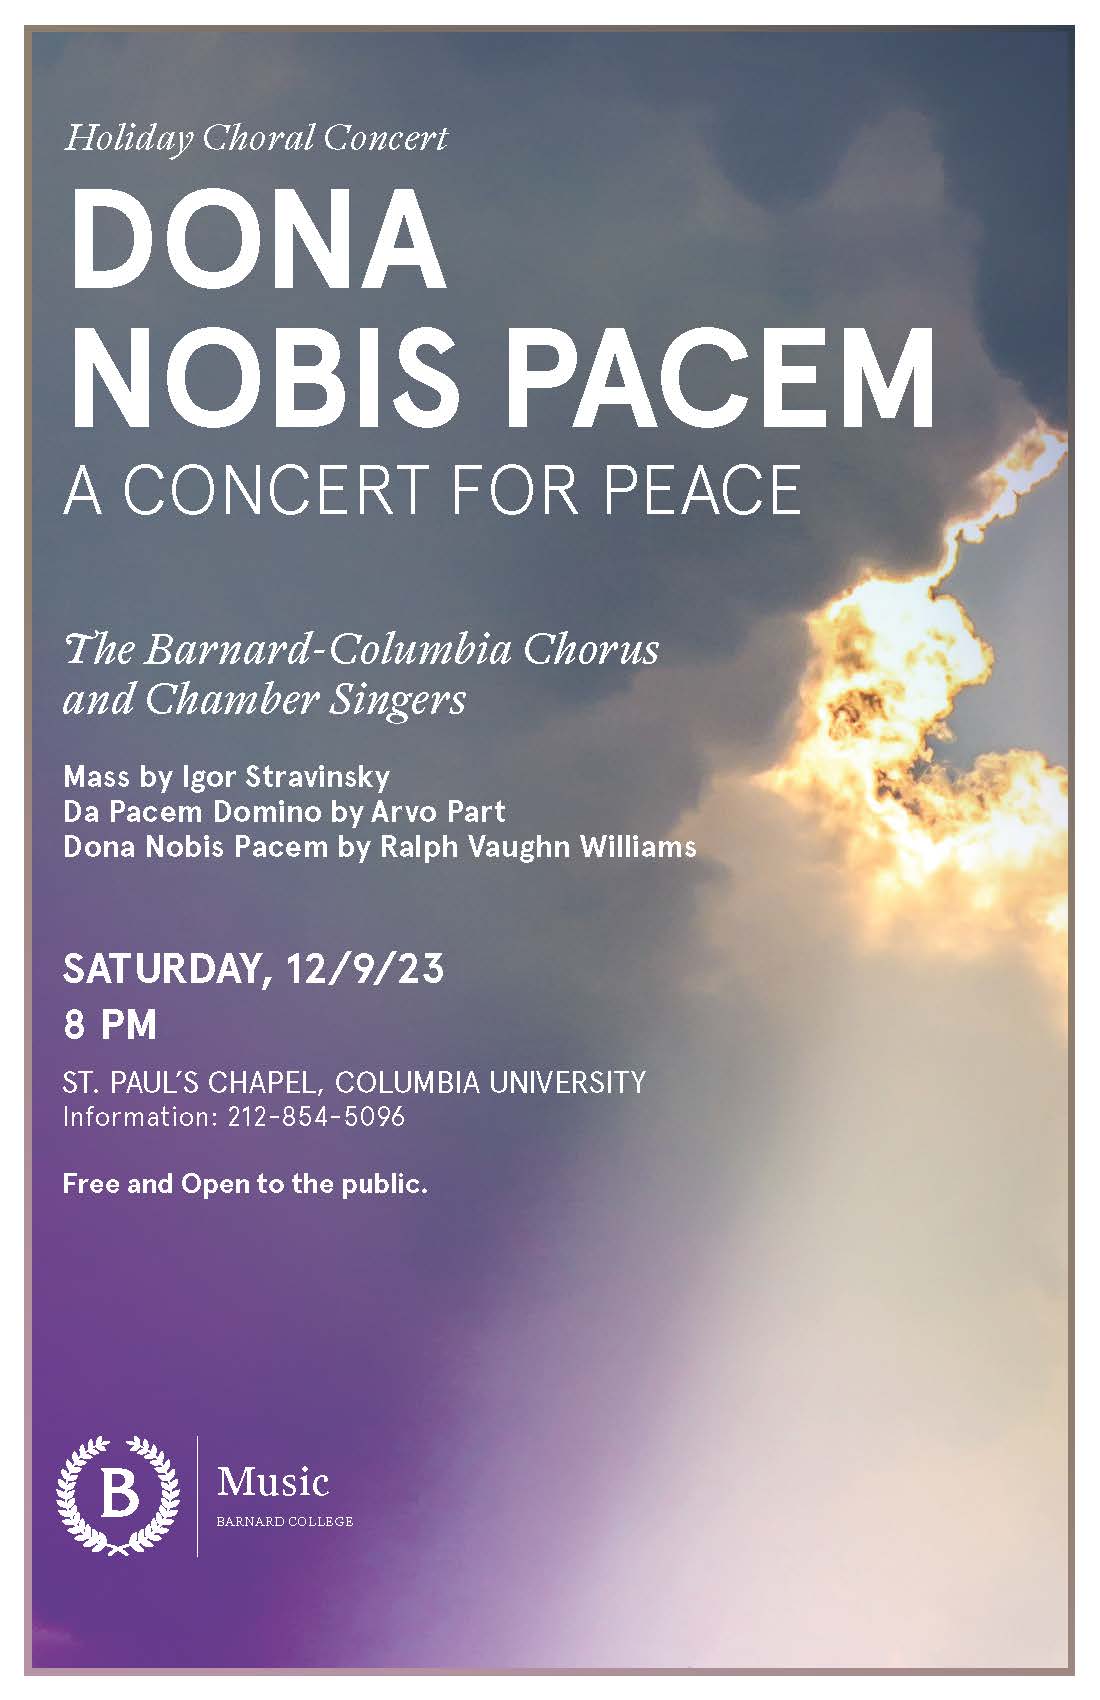 A poster advertising the Holiday Choral Concert. The poster reads: Dona Nobis Pacem, A concert for peace, The Barnard-Columbia Chorus and Chamber singers, Saturday 12/9/23 at 8pm, St. Paul's Chapel Columbia University, Free and Open to the public